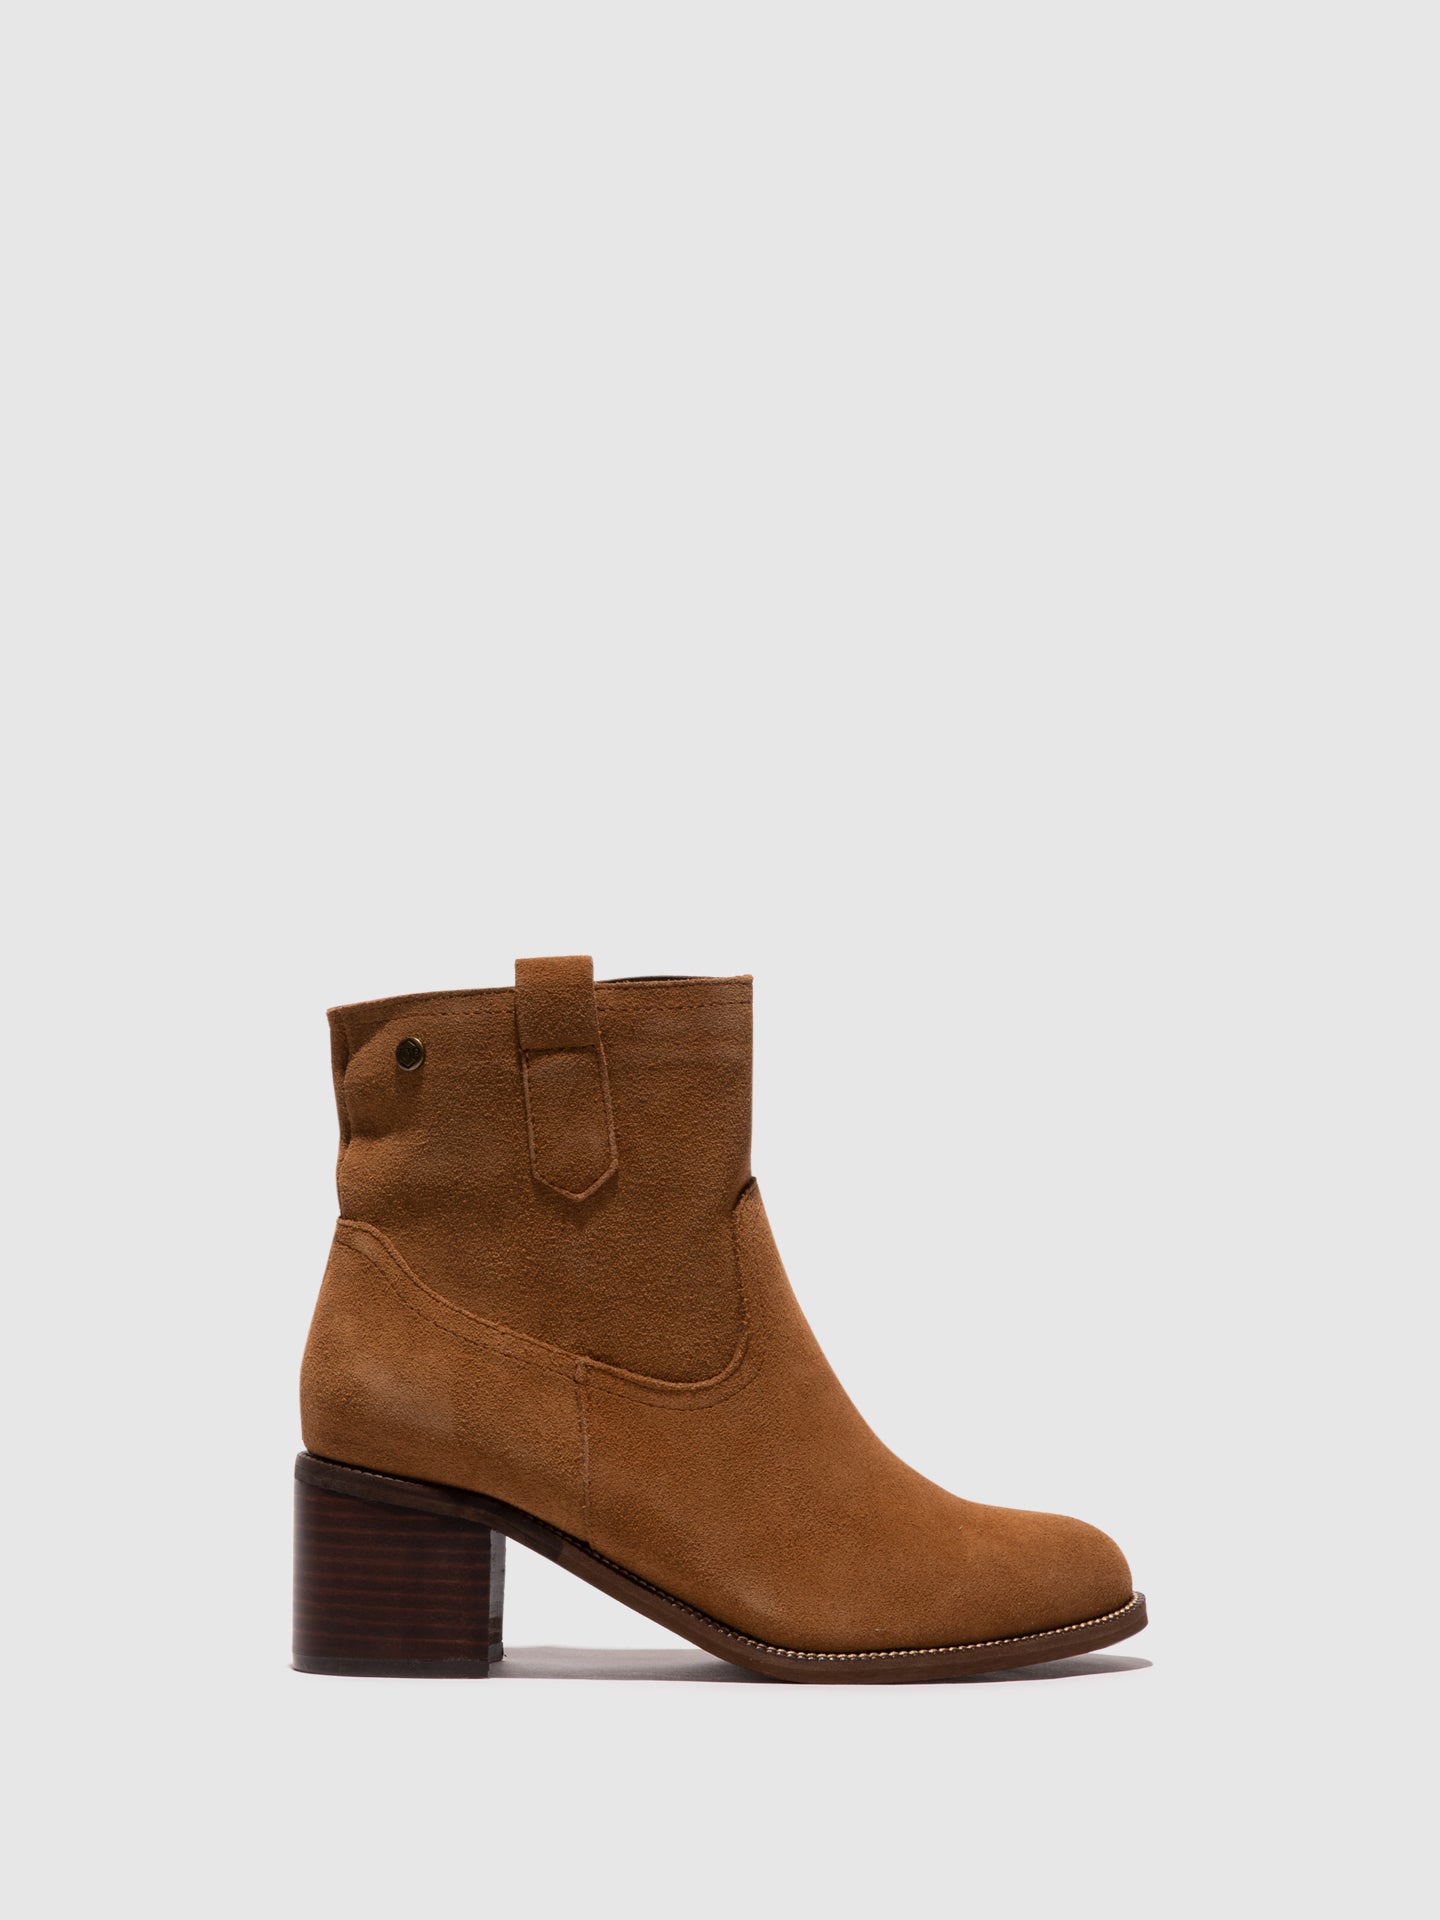 Top3 Camel Round Toe Ankle Boots